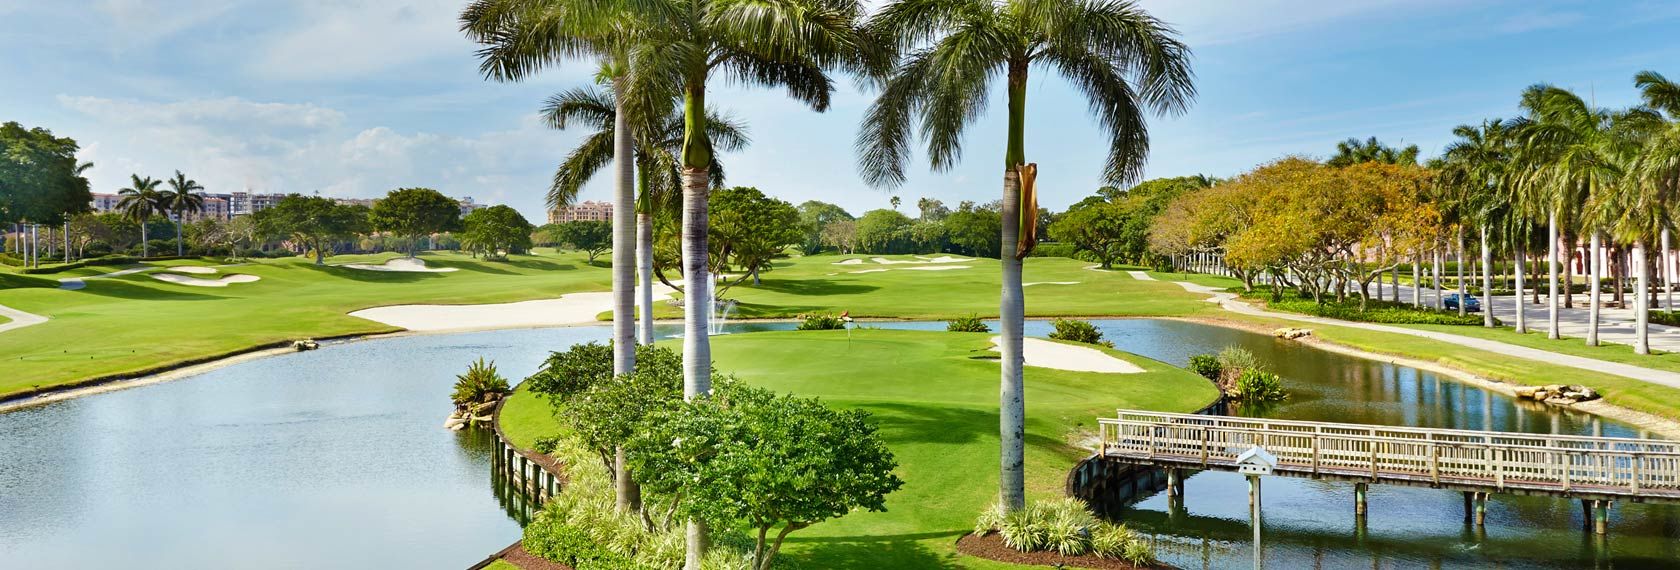 Boca Dunes Golf and Country Club